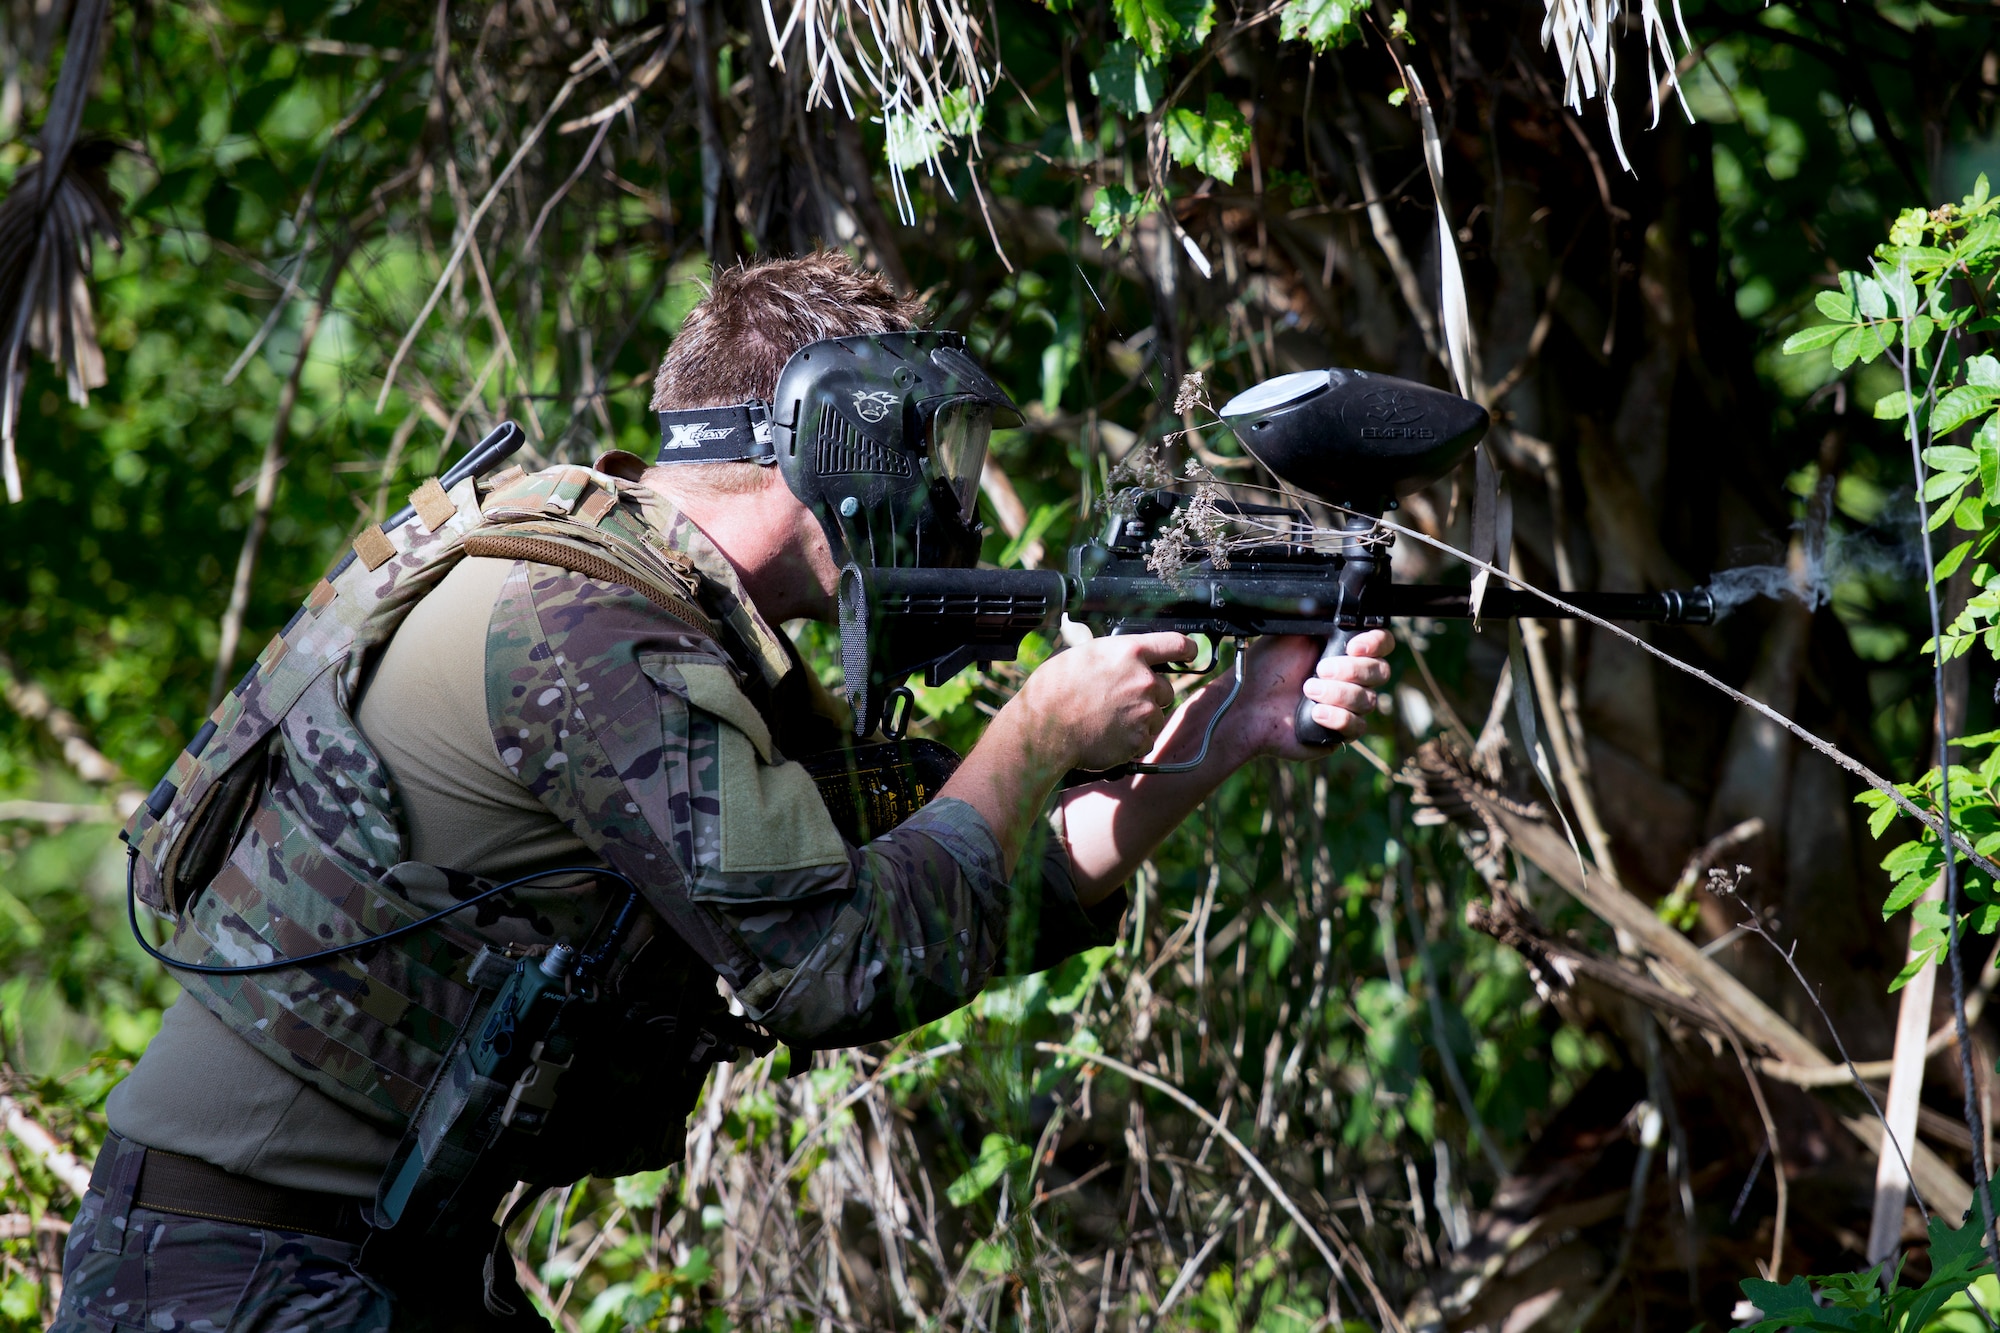 U.S. Air Force Tech. Sgt. Joe White, an explosive ordnance disposal team leader assigned to the 6th Civil Engineer Squadron, reacts to a simulated close ambush at MacDill Air
Force Base, Fla., July 2, 2018.